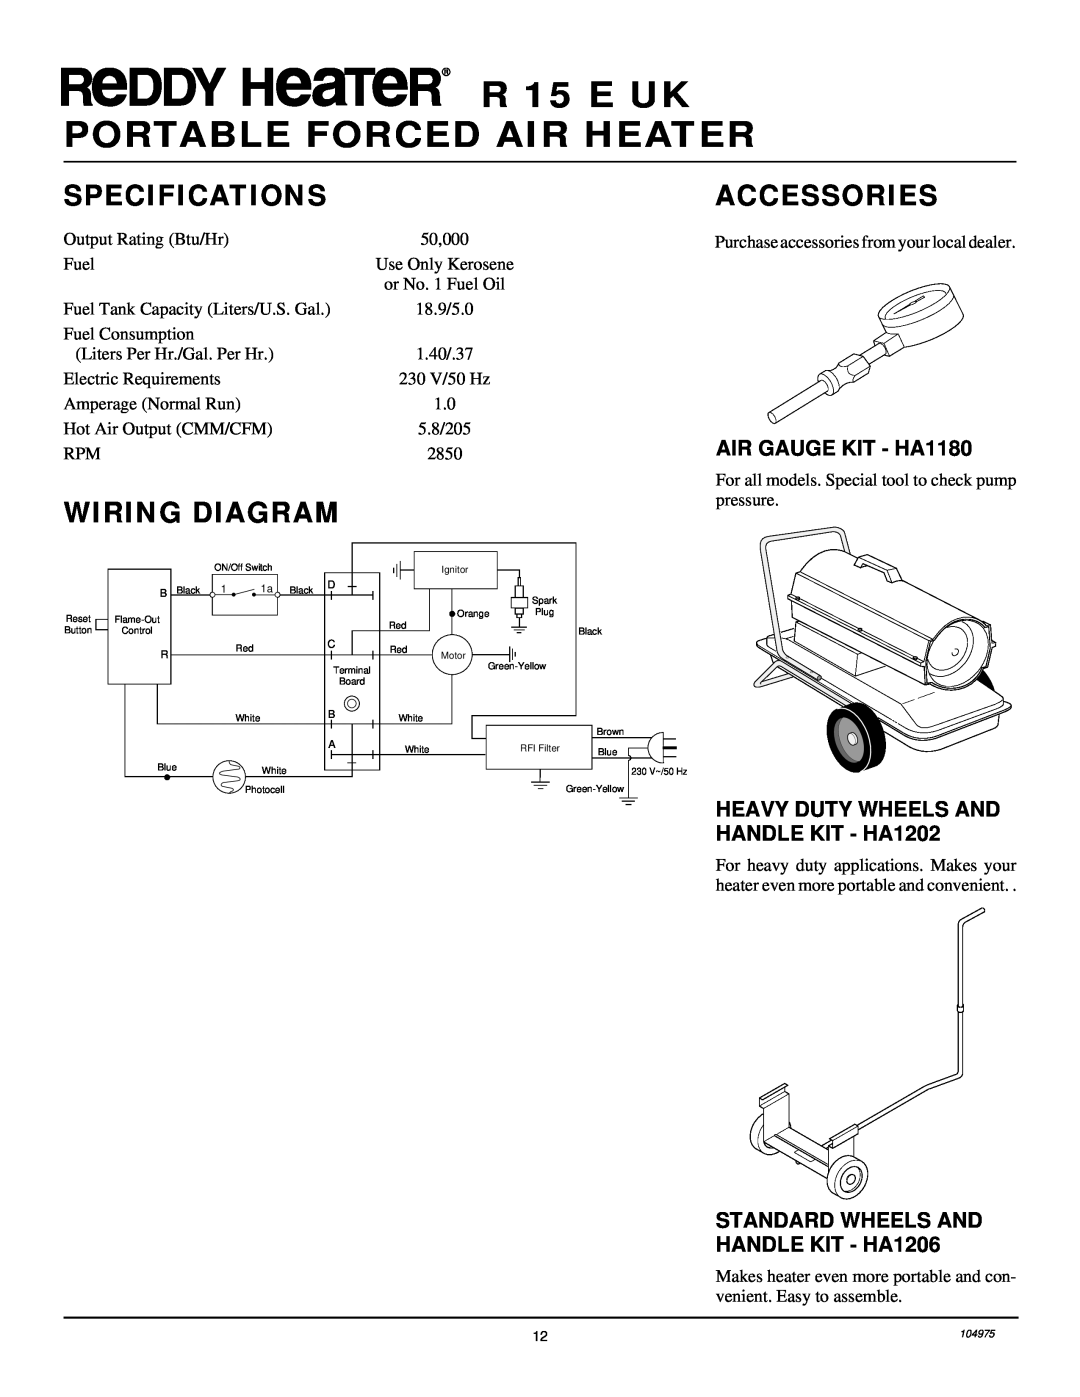 Desa Specifications, Wiring Diagram, Accessories, AIR GAUGE KIT - HA1180, R 15 E UK PORTABLE FORCED AIR HEATER 